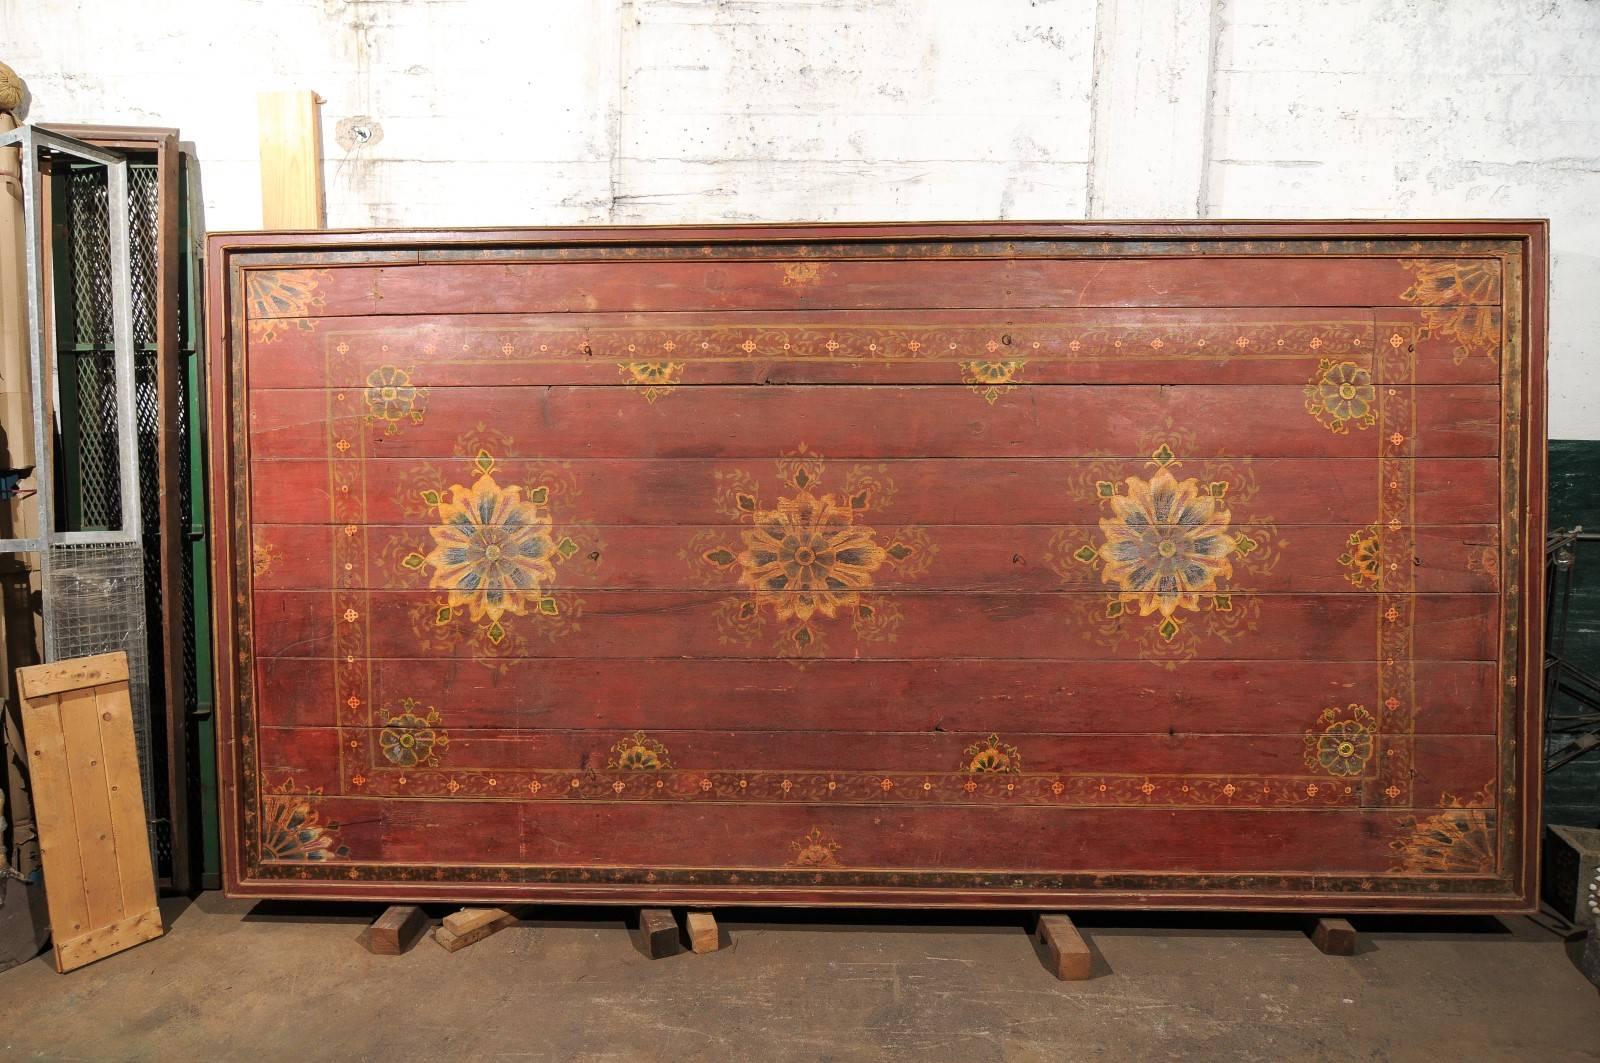 Indian A Grand-Sized 19th C. Beautifully Painted Ceiling Panel from South India For Sale